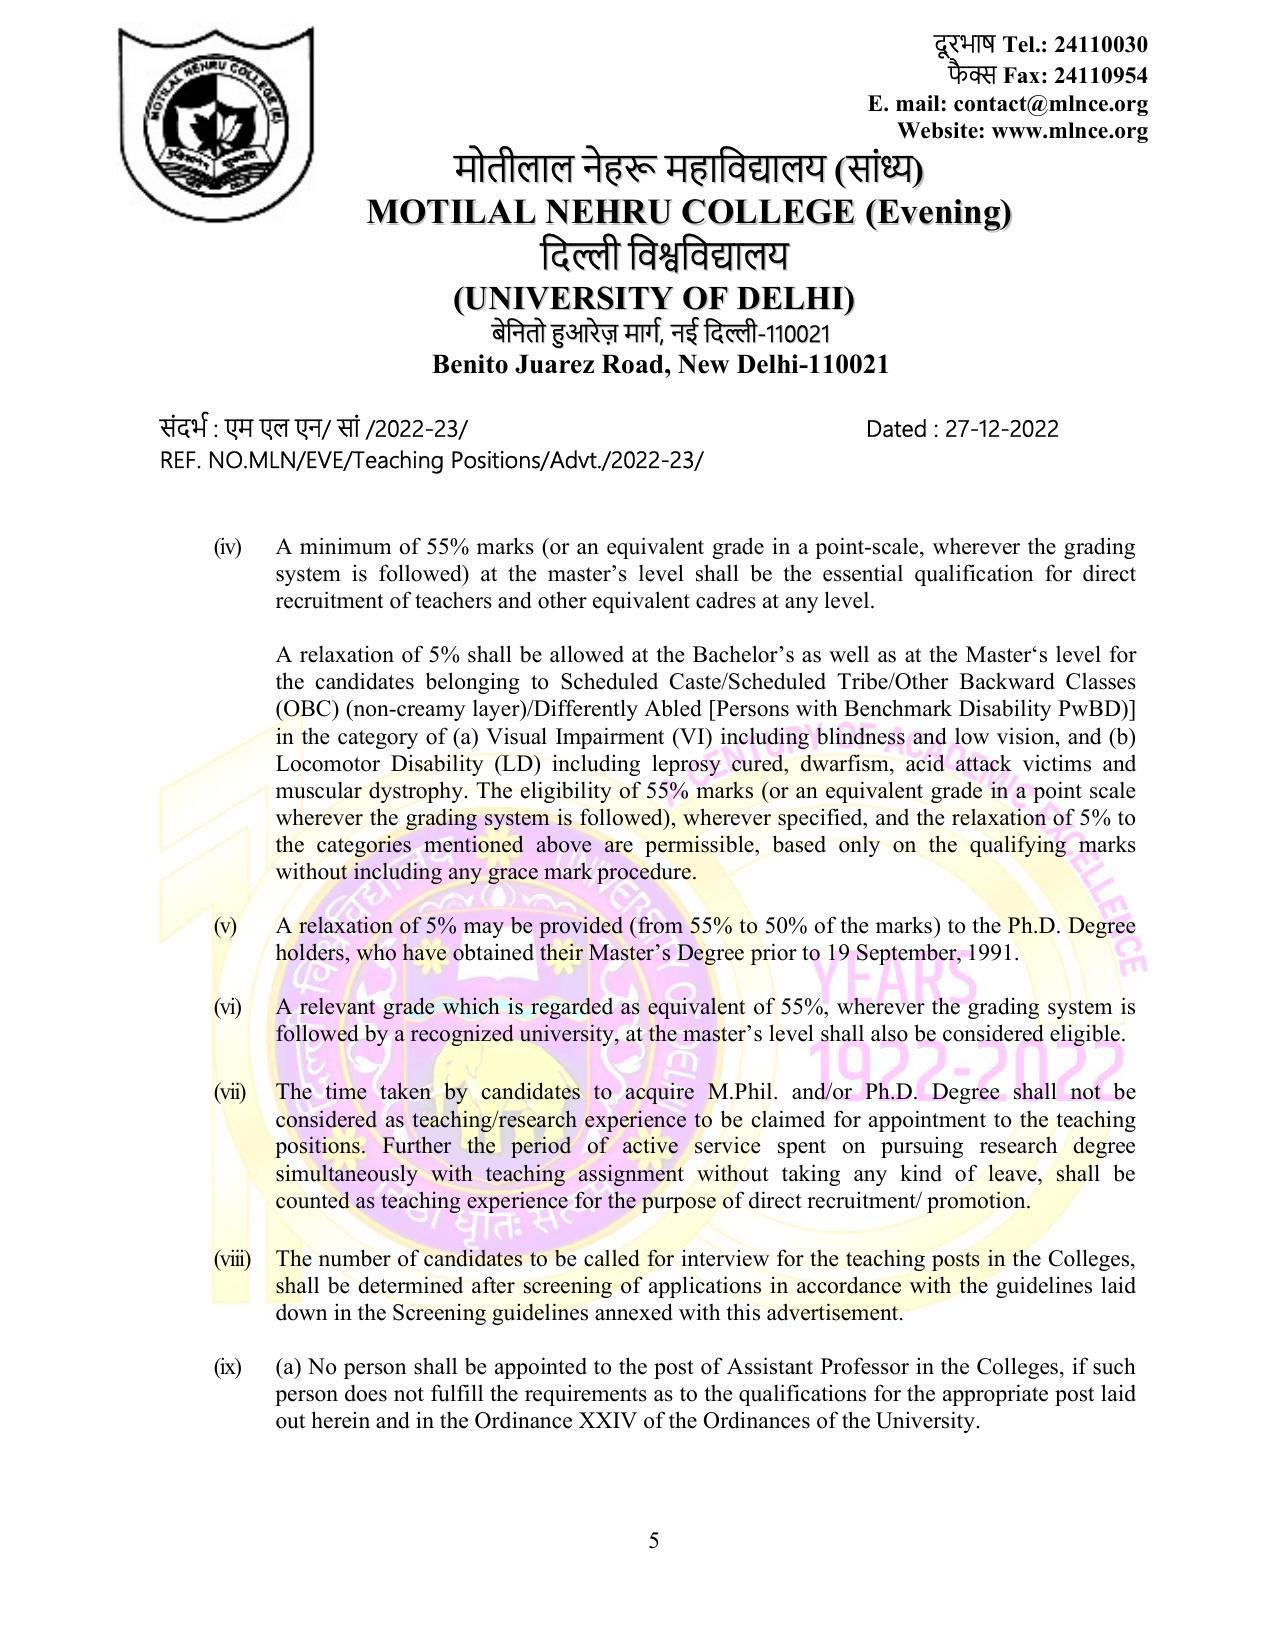 Motilal Nehru College (Evening) Invites Application for 75 Assistant Professor Recruitment 2022 - Page 7